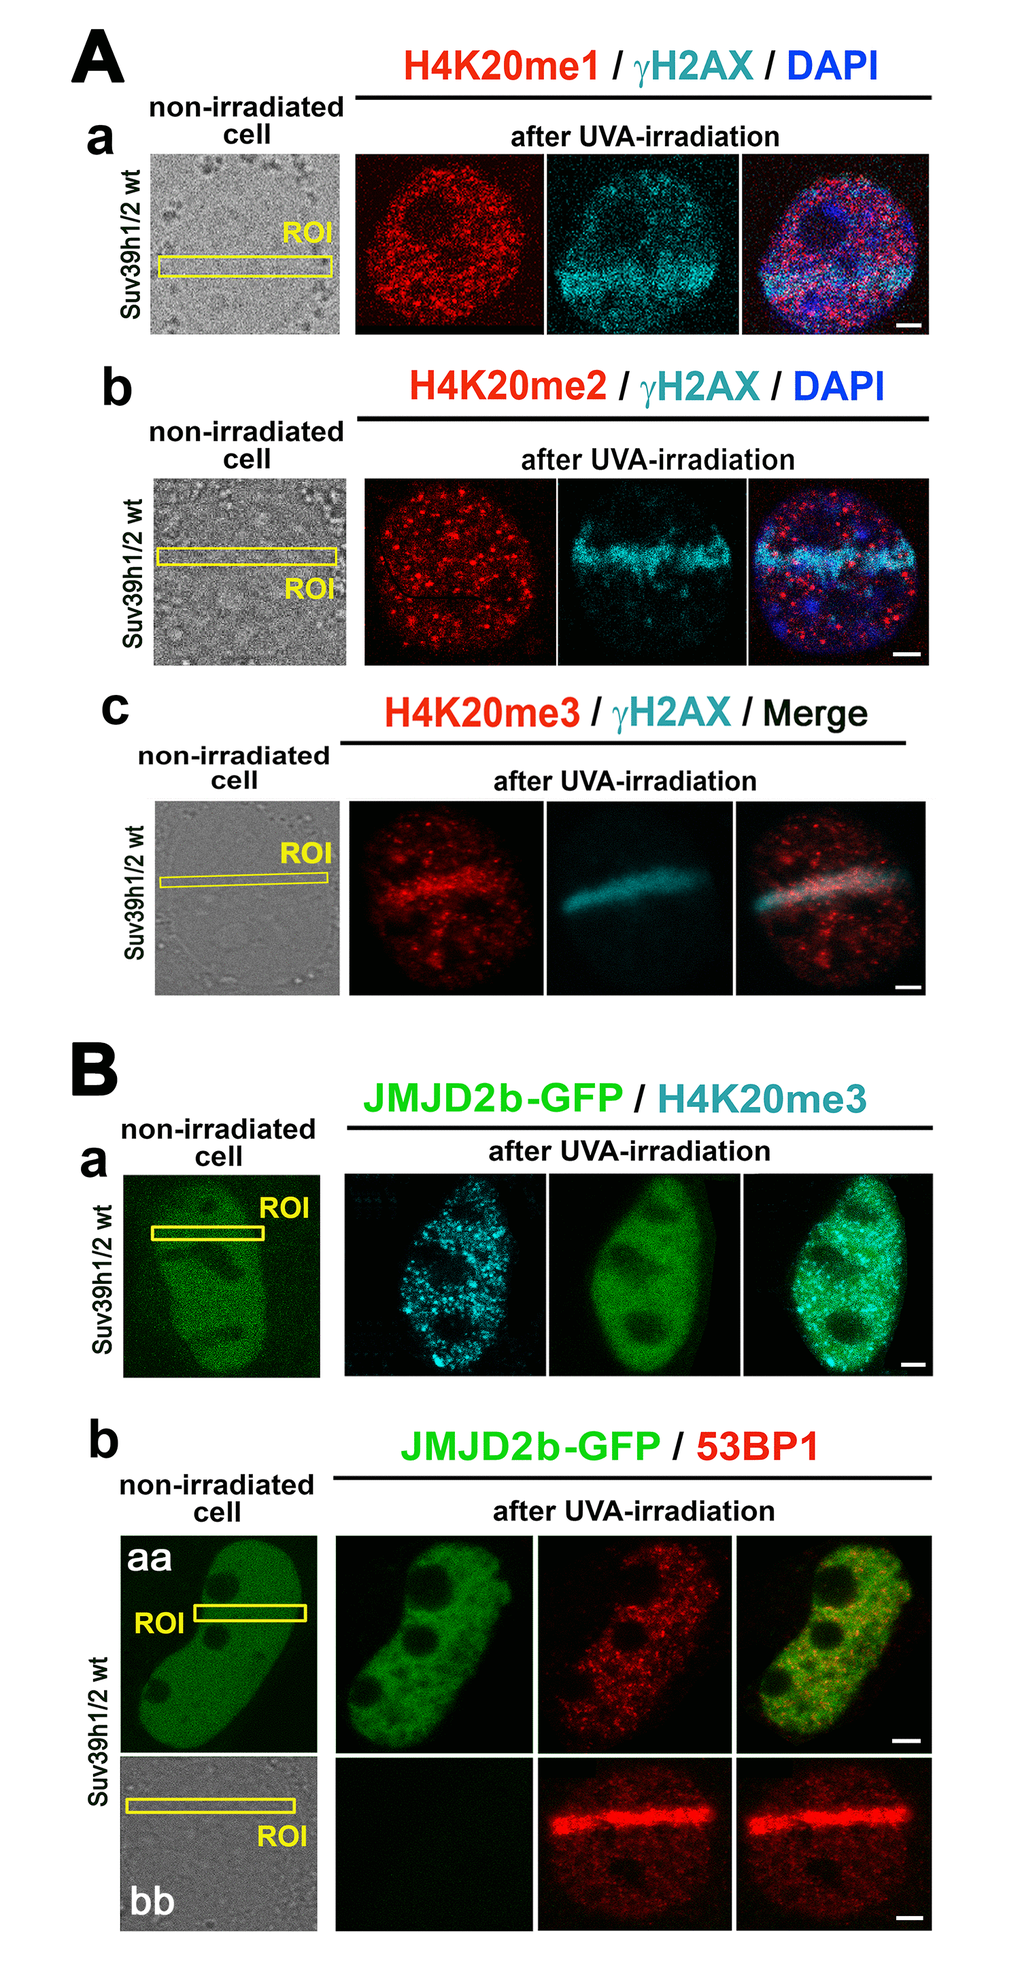 The nuclear distribution pattern of H4K20me1/me2/me3 at DNA lesions. (A) The levels of (a) H4K20me1 (red) in γH2AX-positive DNA lesions (magenta), (b) H4K20me2 (red) in γH2AX-positive DNA lesions (magenta), and (c) H4K20me3 (red) in DNA lesions studied in parallel with γH2AX (magenta). (B) The level of (a) H4K20me3 and (b) 53BP1 in micro-irradiated ROI of the cells over-expressing JMJD2b histone demethylase, tagged by GFP. Panels Bb-aa show low level of 53BP1 at micro-irradiation induced DNA lesions in cells over-expressing GFP-tagged JMJD2b and panel Bb-bb documents 53BP1 recruitment to DSB sites in the cells with a normal expression of JMJD2b. Scale bars in all panels represent 5 µm.